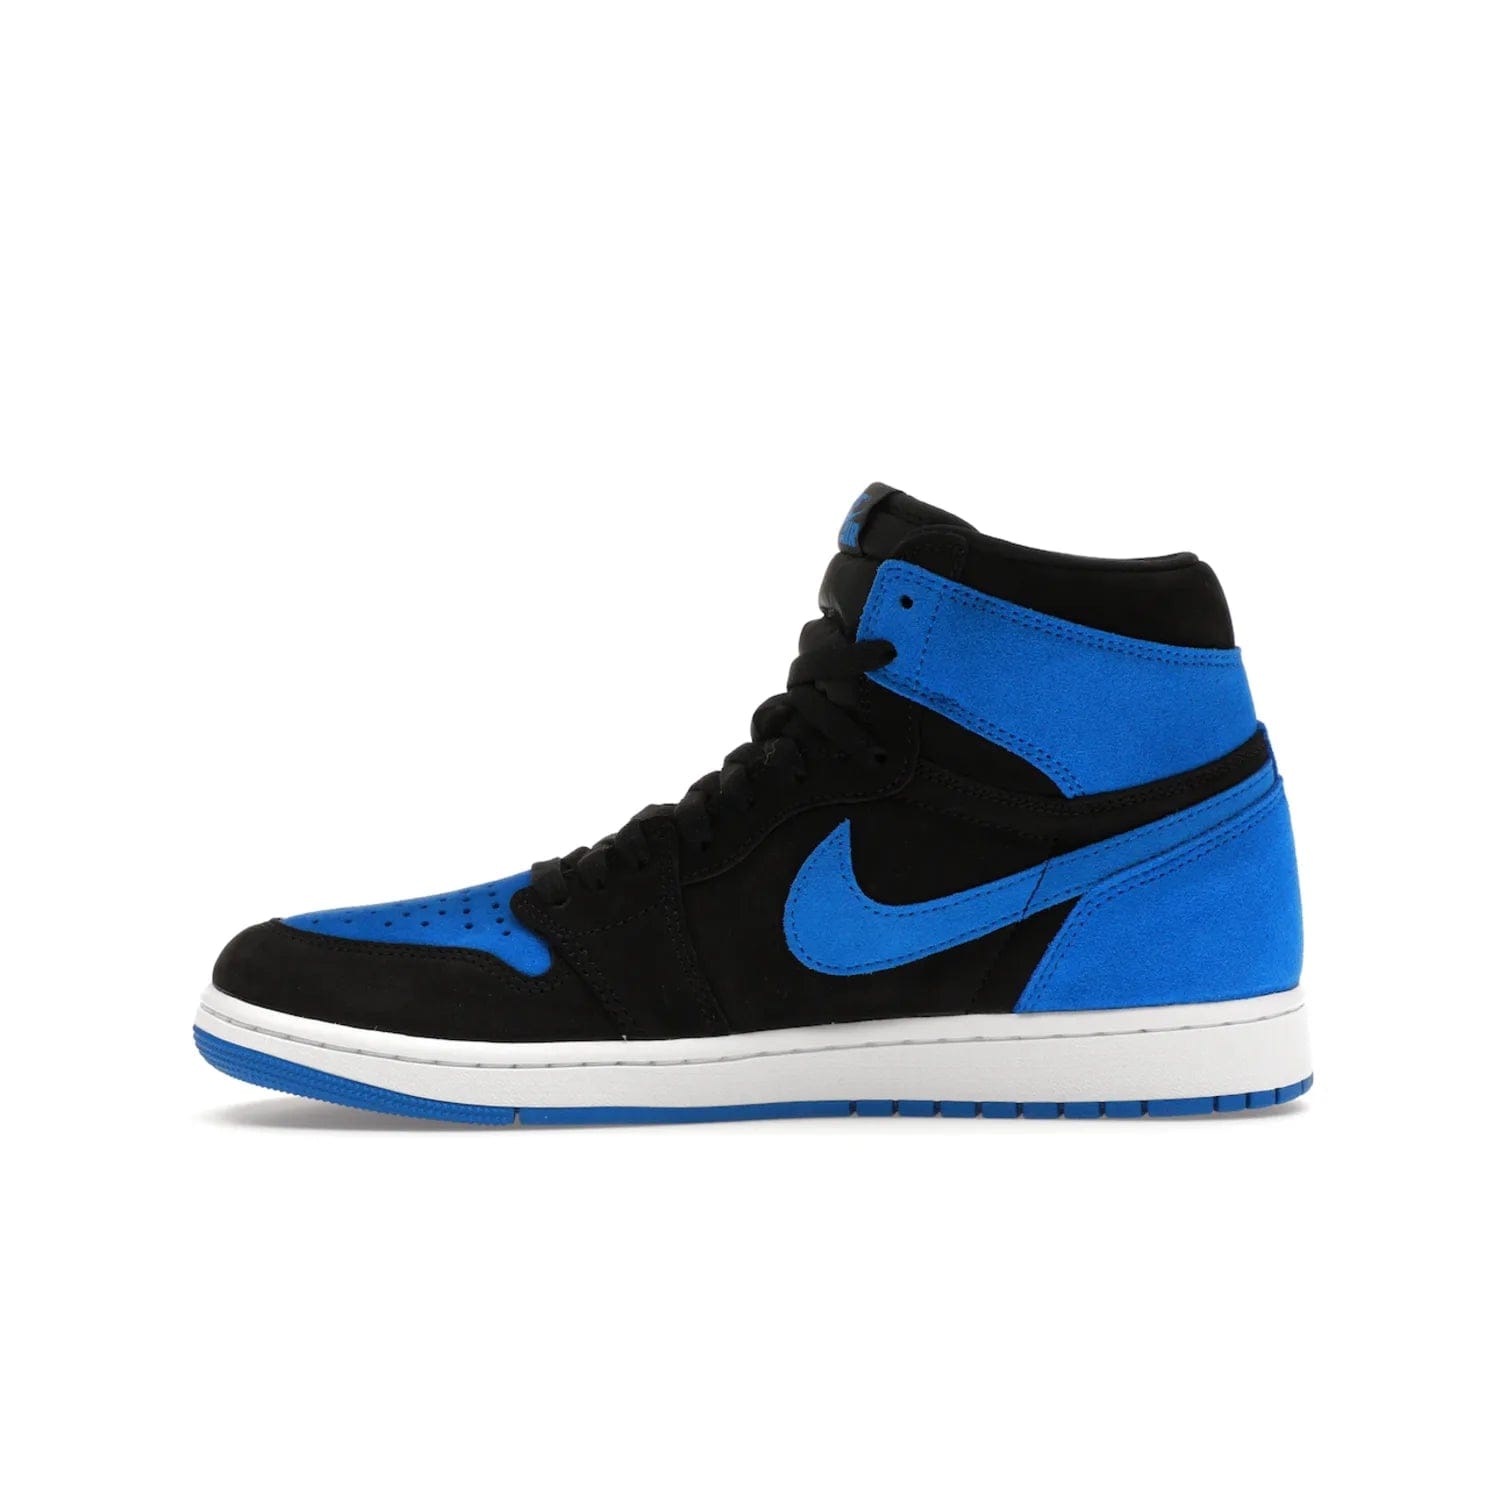 Jordan 1 Retro High OG Royal Reimagined - Image 19 - Only at www.BallersClubKickz.com - ####
Old meets the new: Jordan 1 Retro High OG 'Royal Reimagined' is a bold statement of evolution with its royal blue and black suede material makeup. Swoosh overlays, Wings logos, padded ankle collars and Nike Air tags maintain the OG's legendary lineage. Get a pair on November 4th and be part of a fearless, unyielding story.